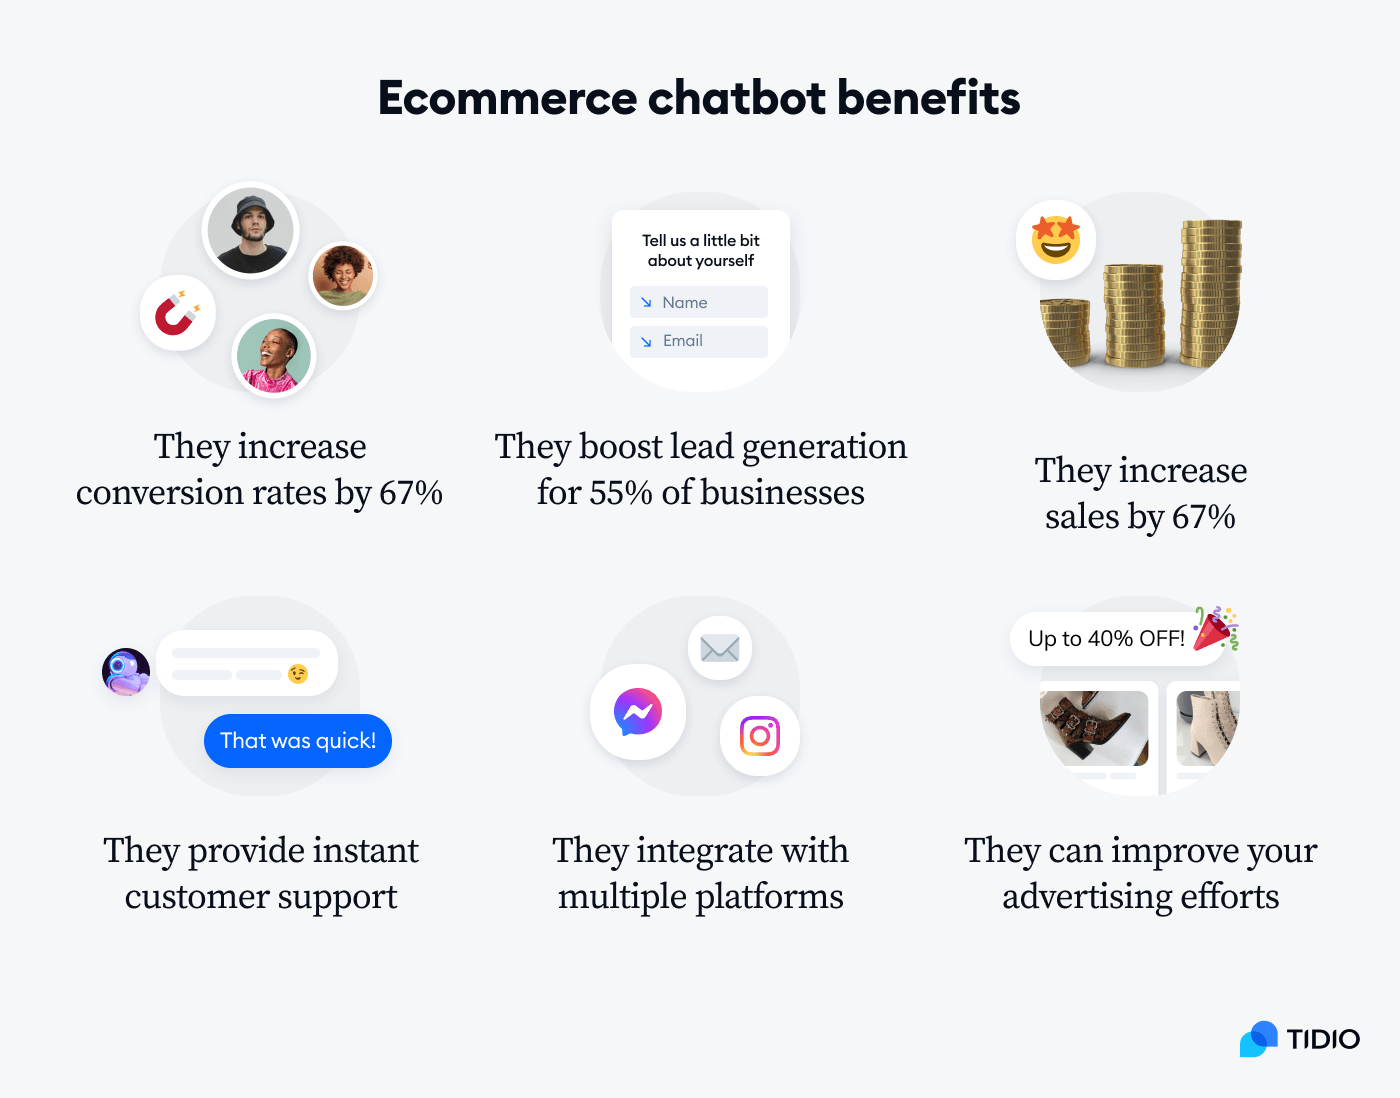 main business benefits of chatbots for ecommerce